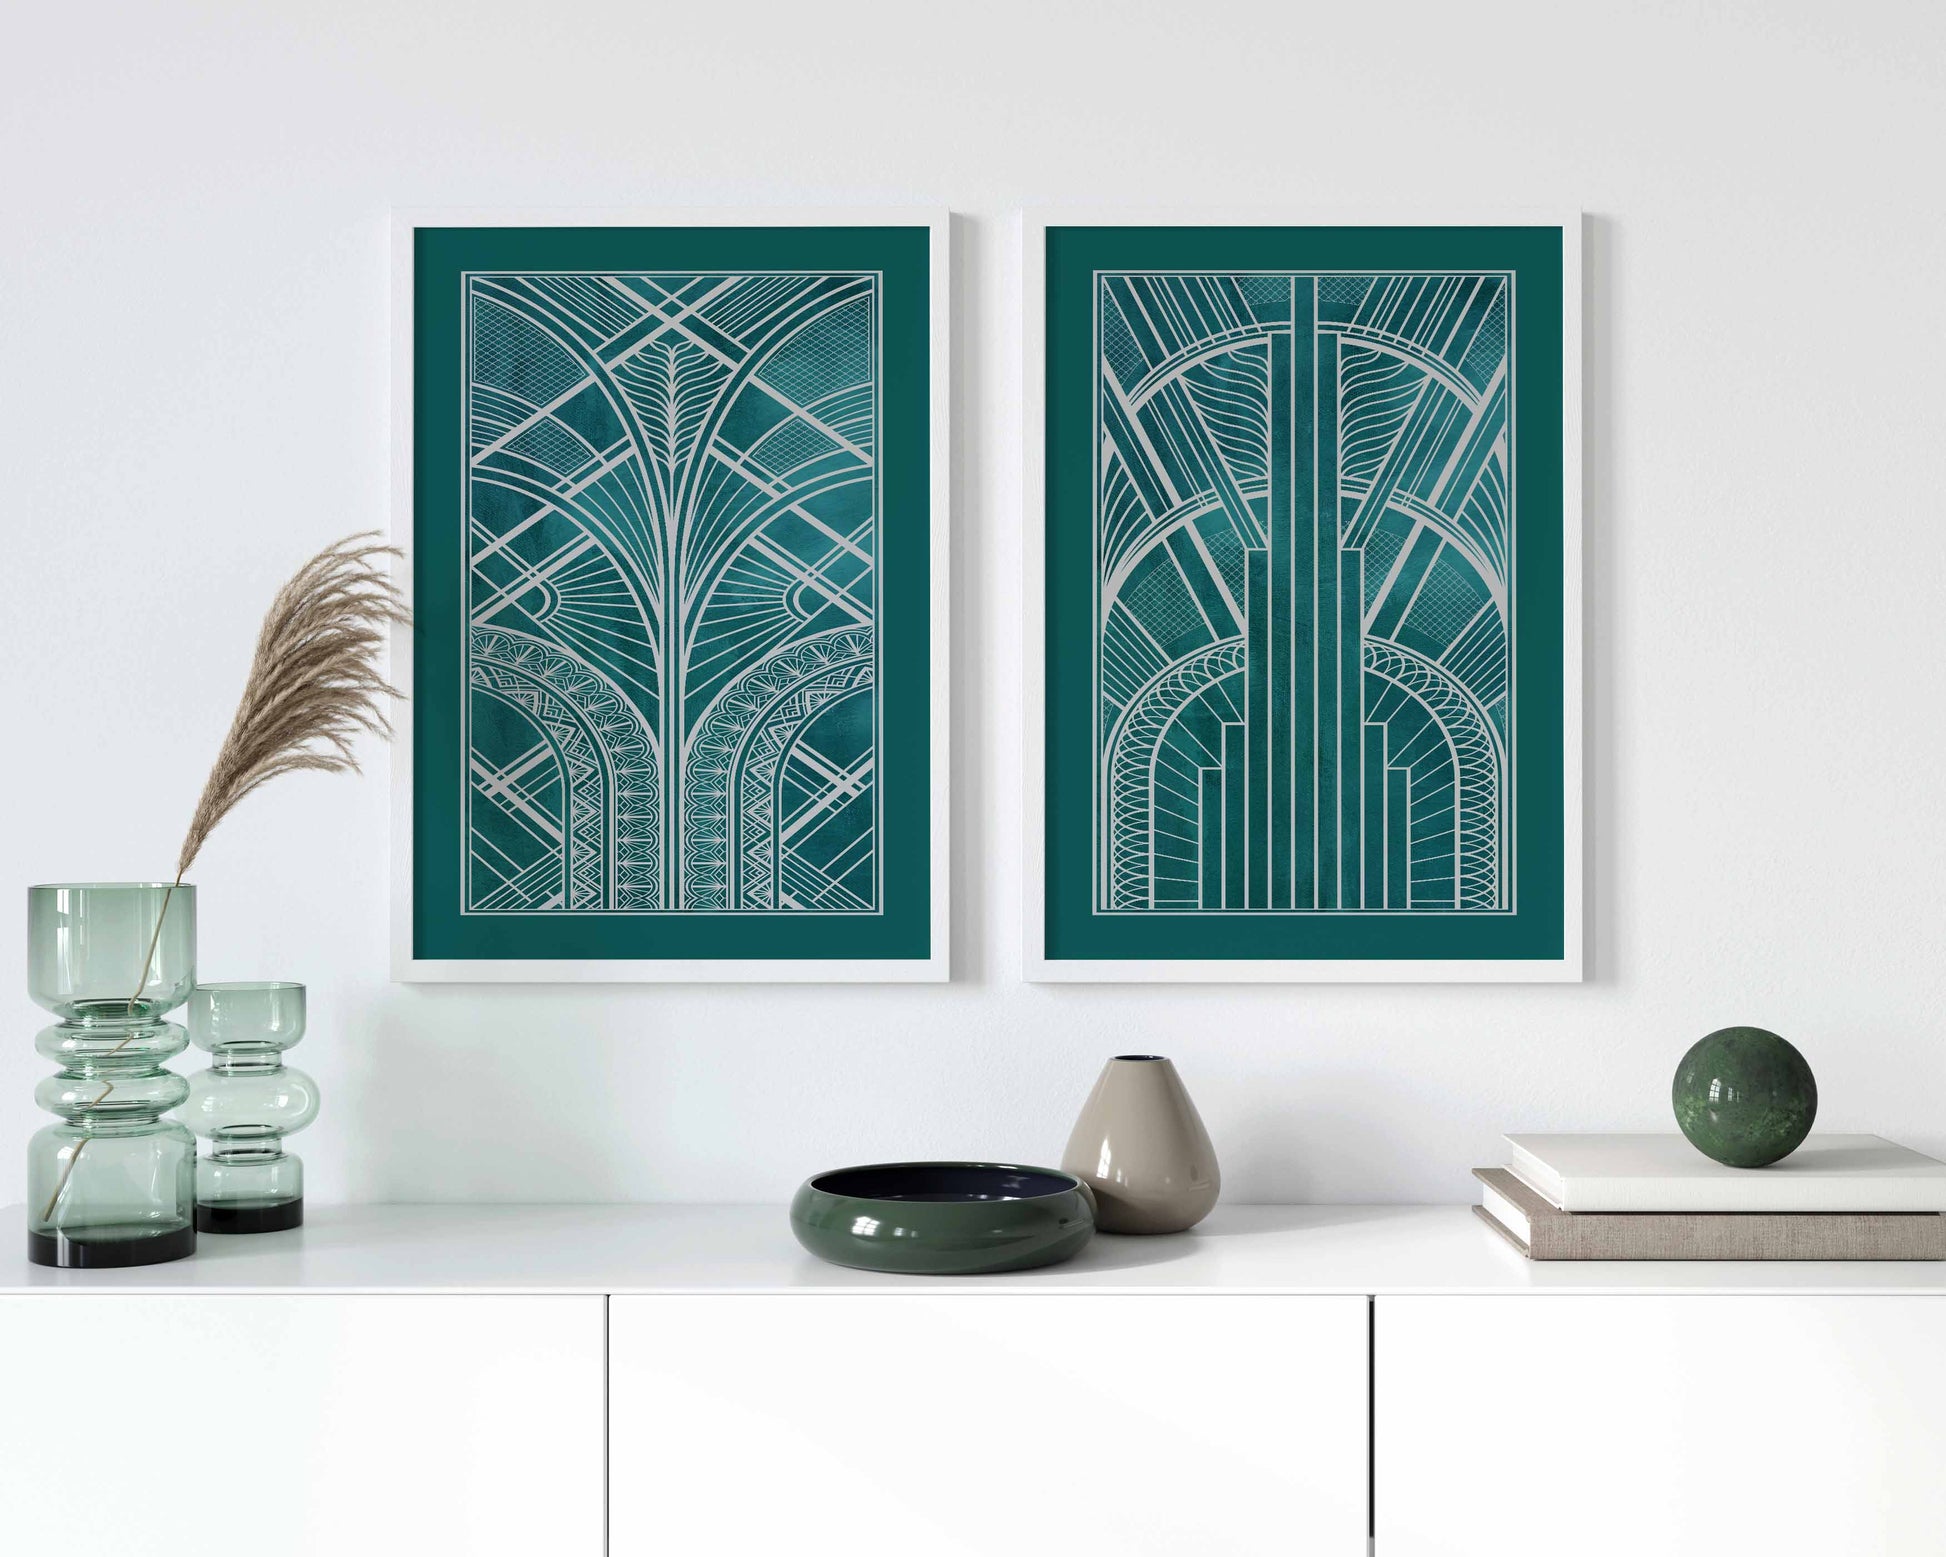 Set of 2 art deco art prints in teal and silver